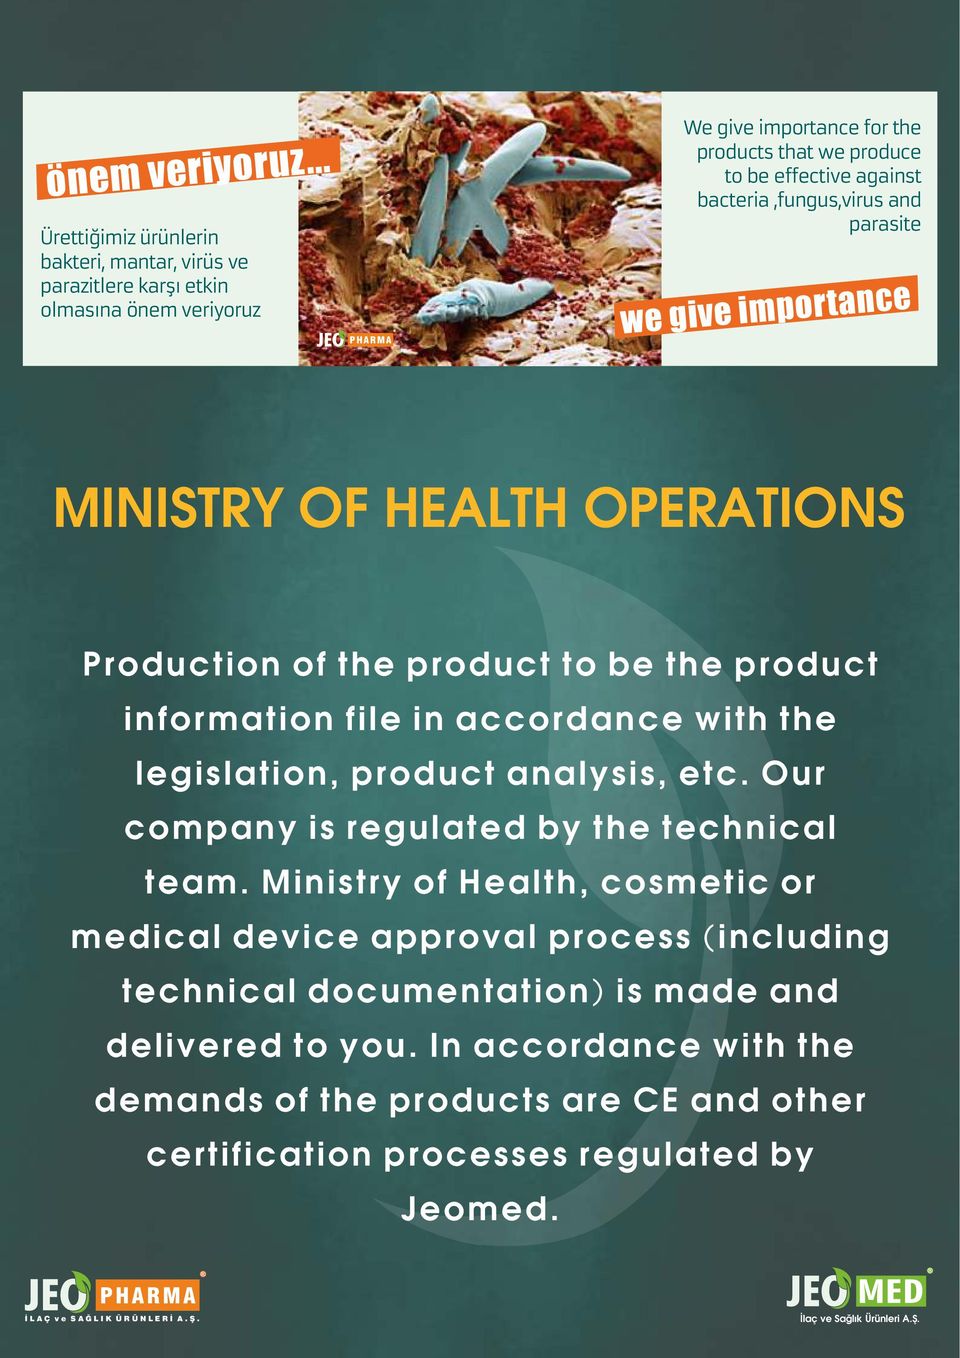 against bacteria,fungus,virus and parasite we give importance MINISTRY OF HEALTH OPERATIONS Production of the product to be the product information file in accordance